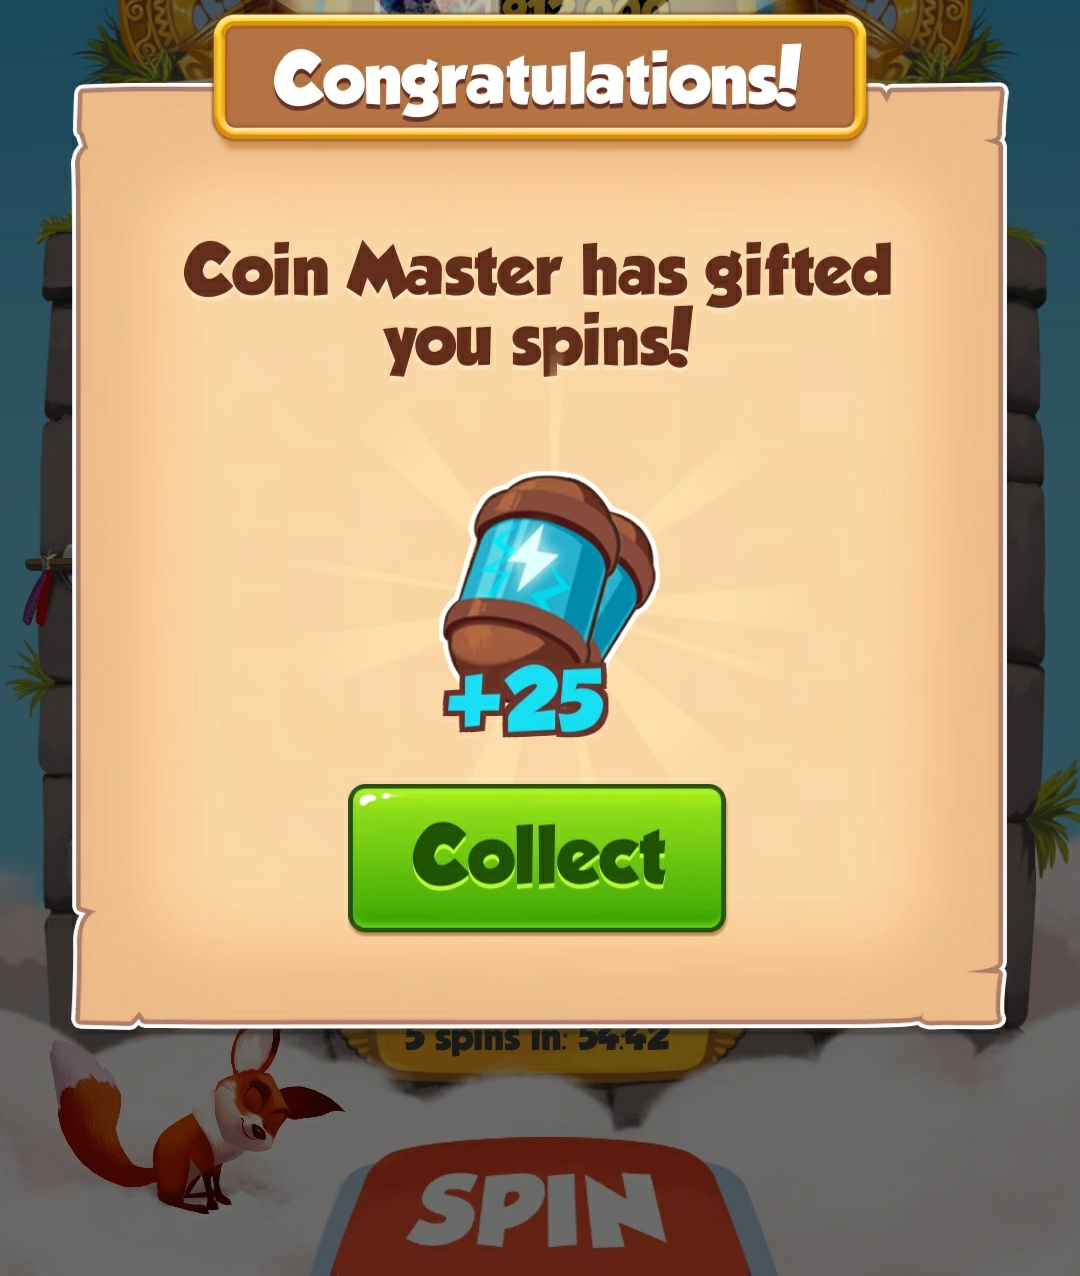 Coin Master Link For Spin